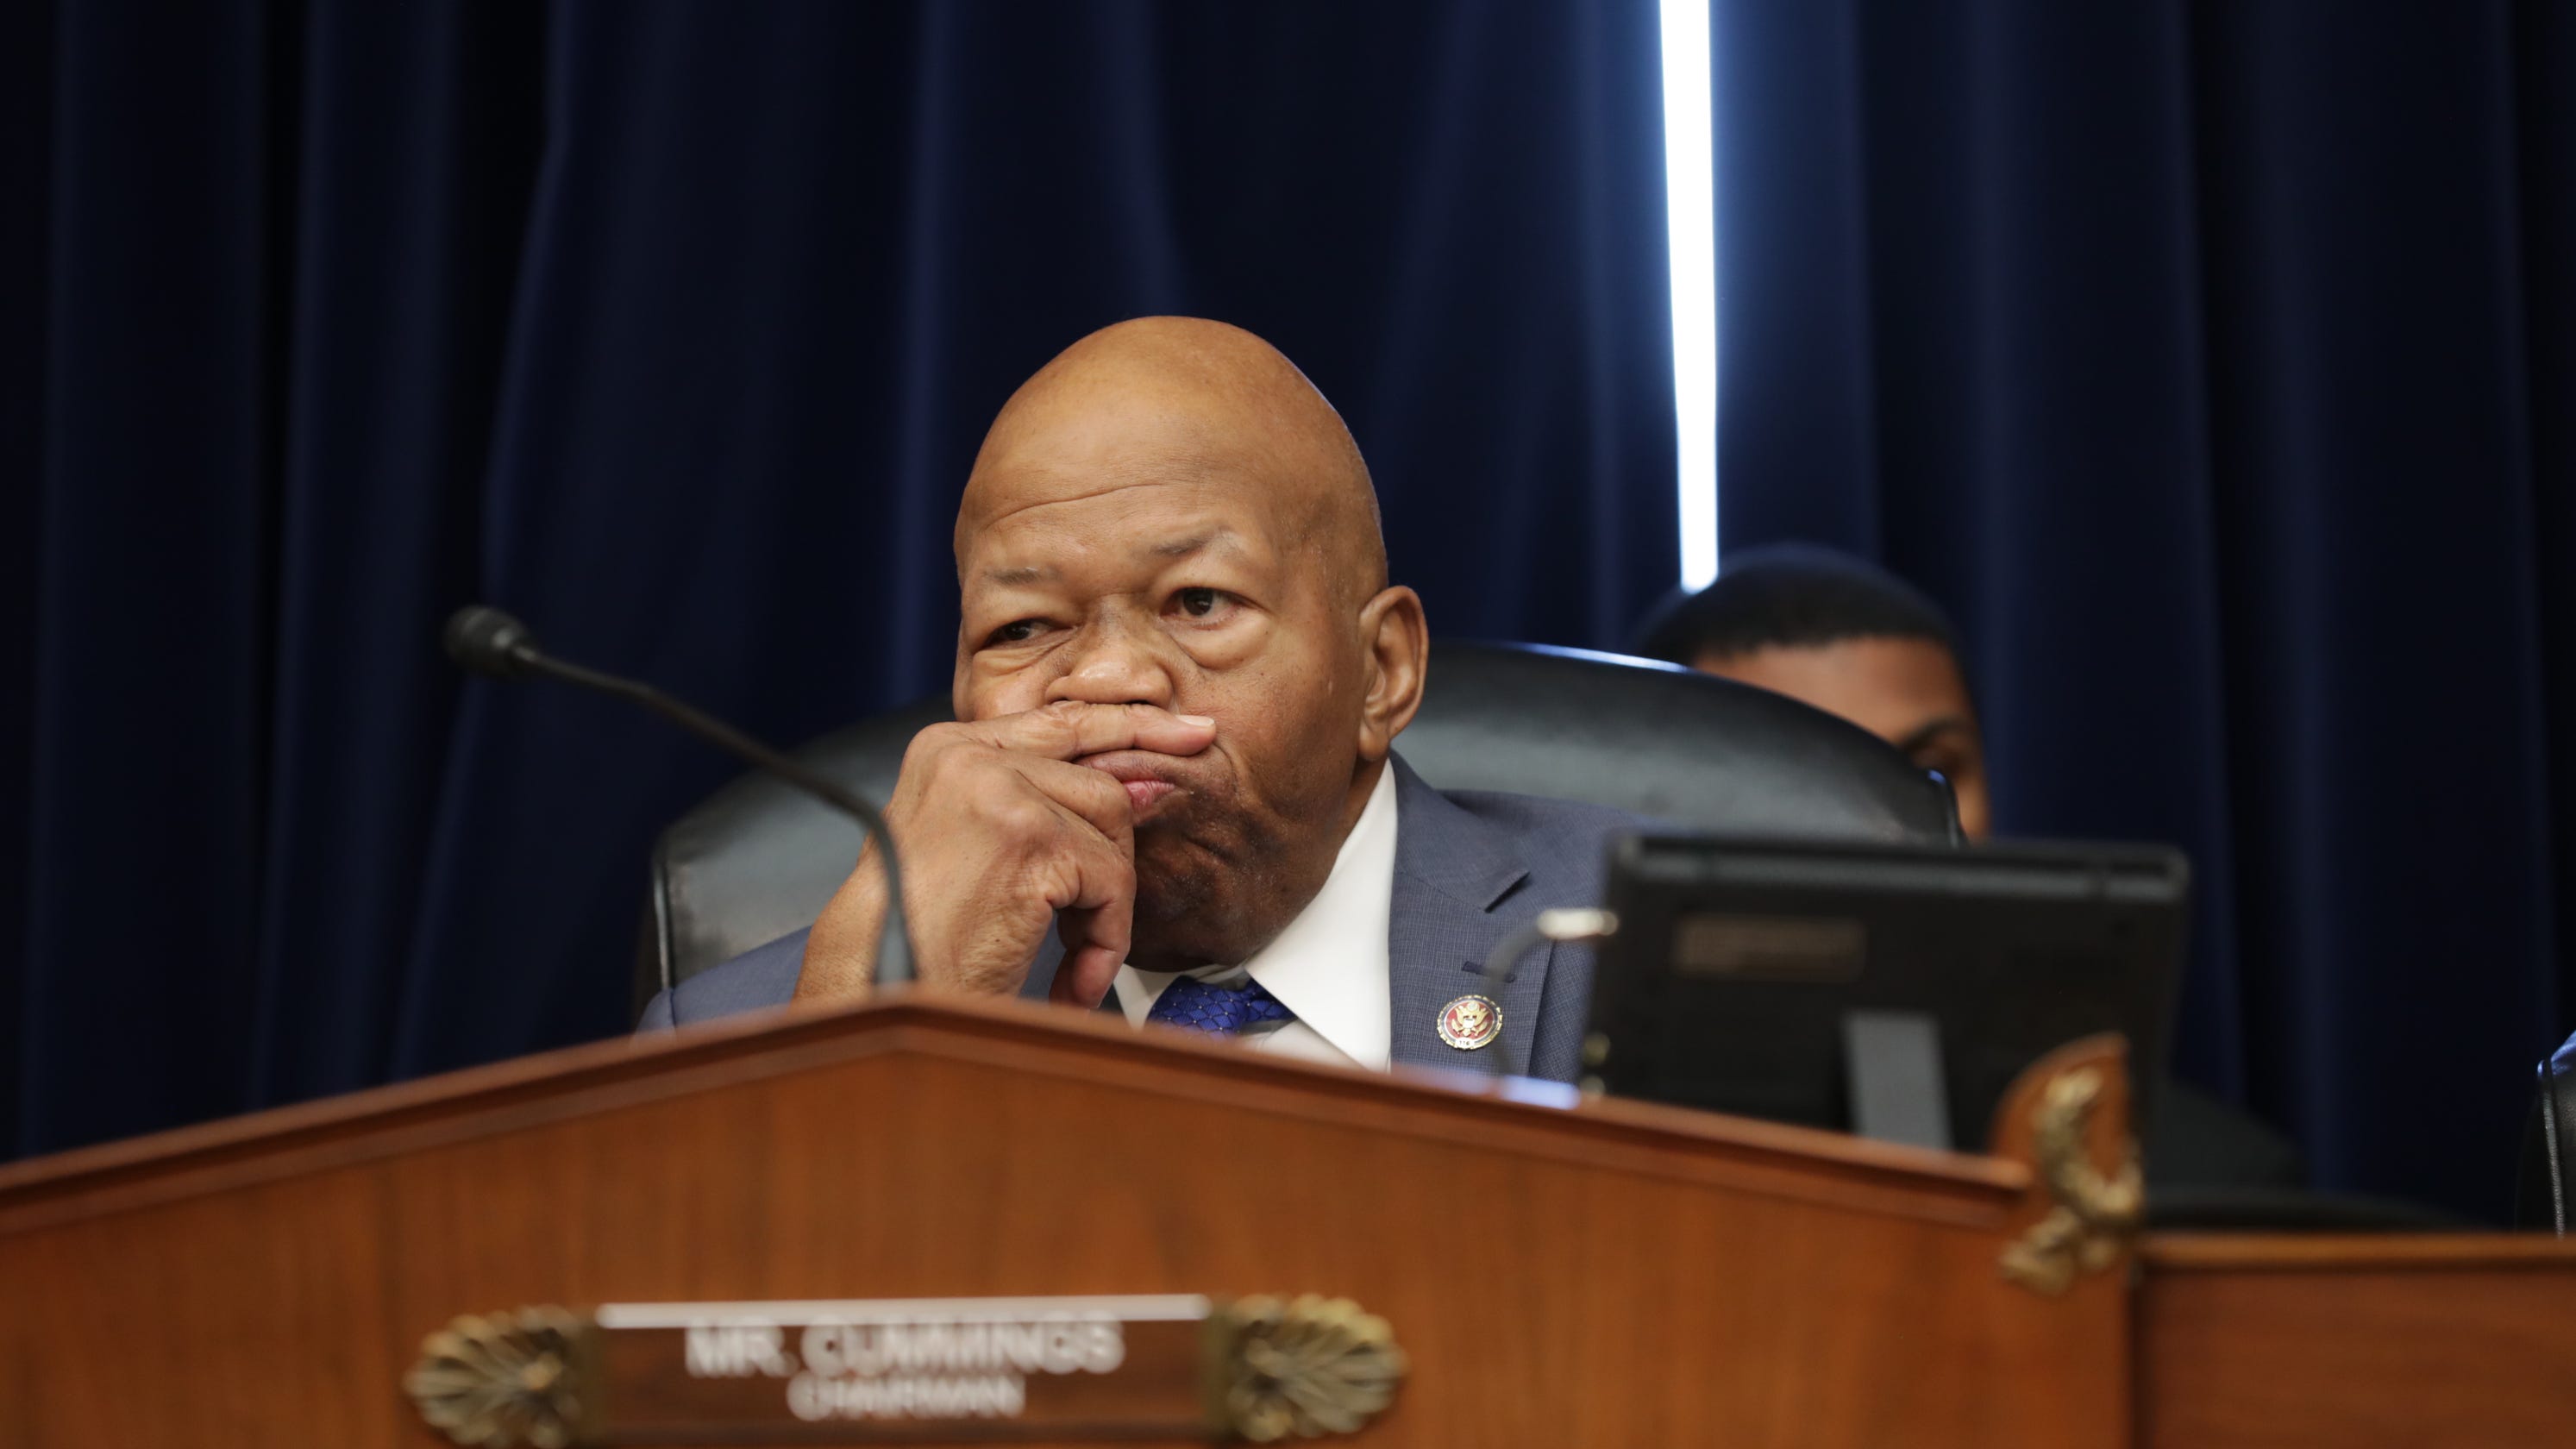 Michael Cohen: Who is Elijah Cummings, chair of House Oversight panel?2987 x 1680